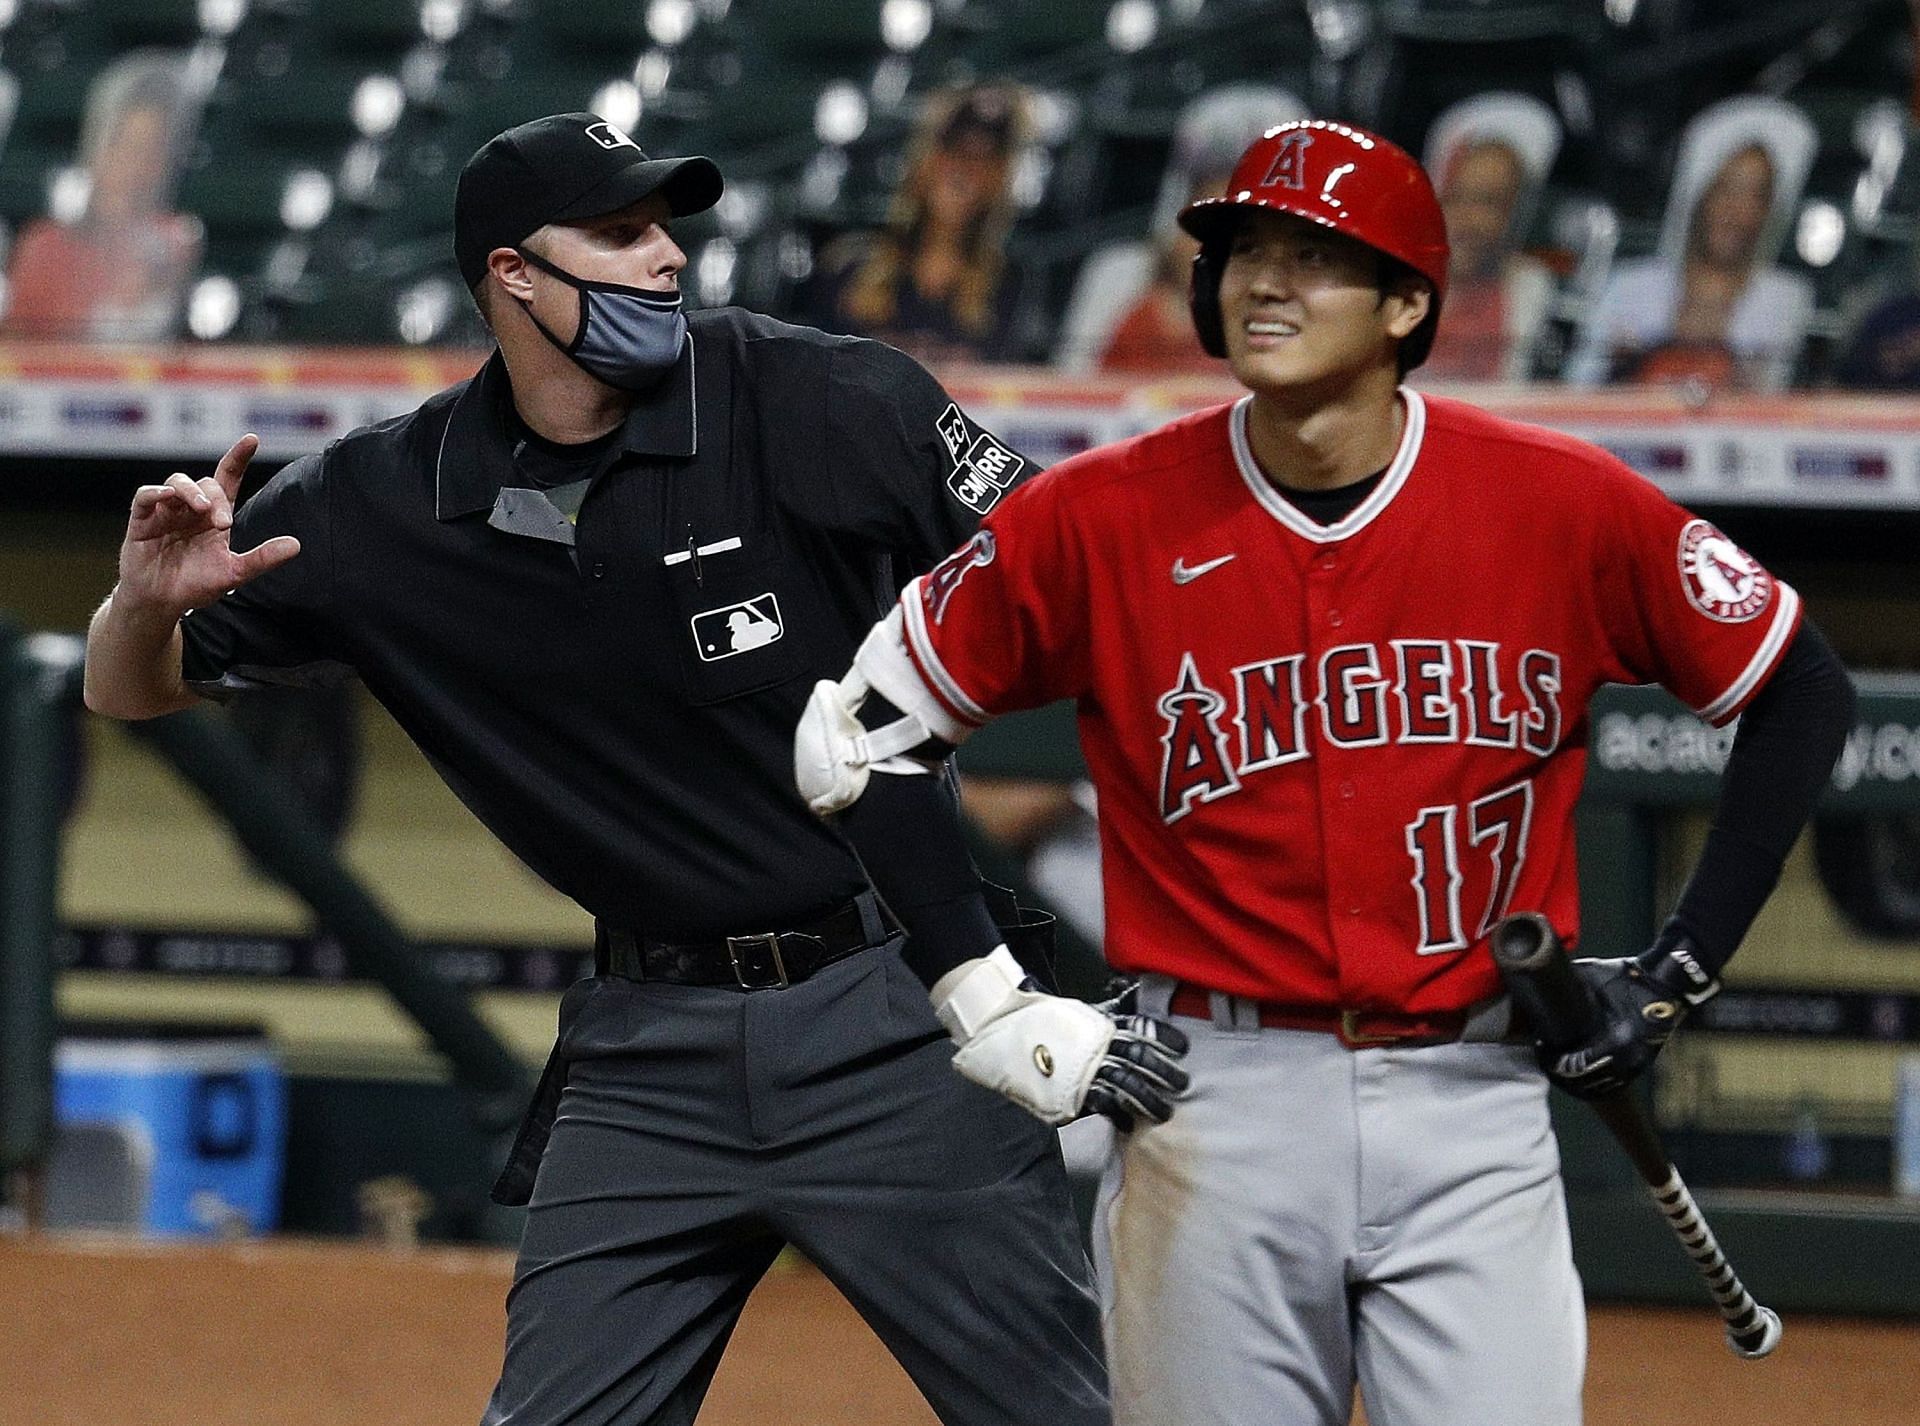 In his two starts against the New York Yankees, Shohei Ohtani has only thrown 3.2 innings and surrendered 11 earned runs, easily the worst mark of his career.